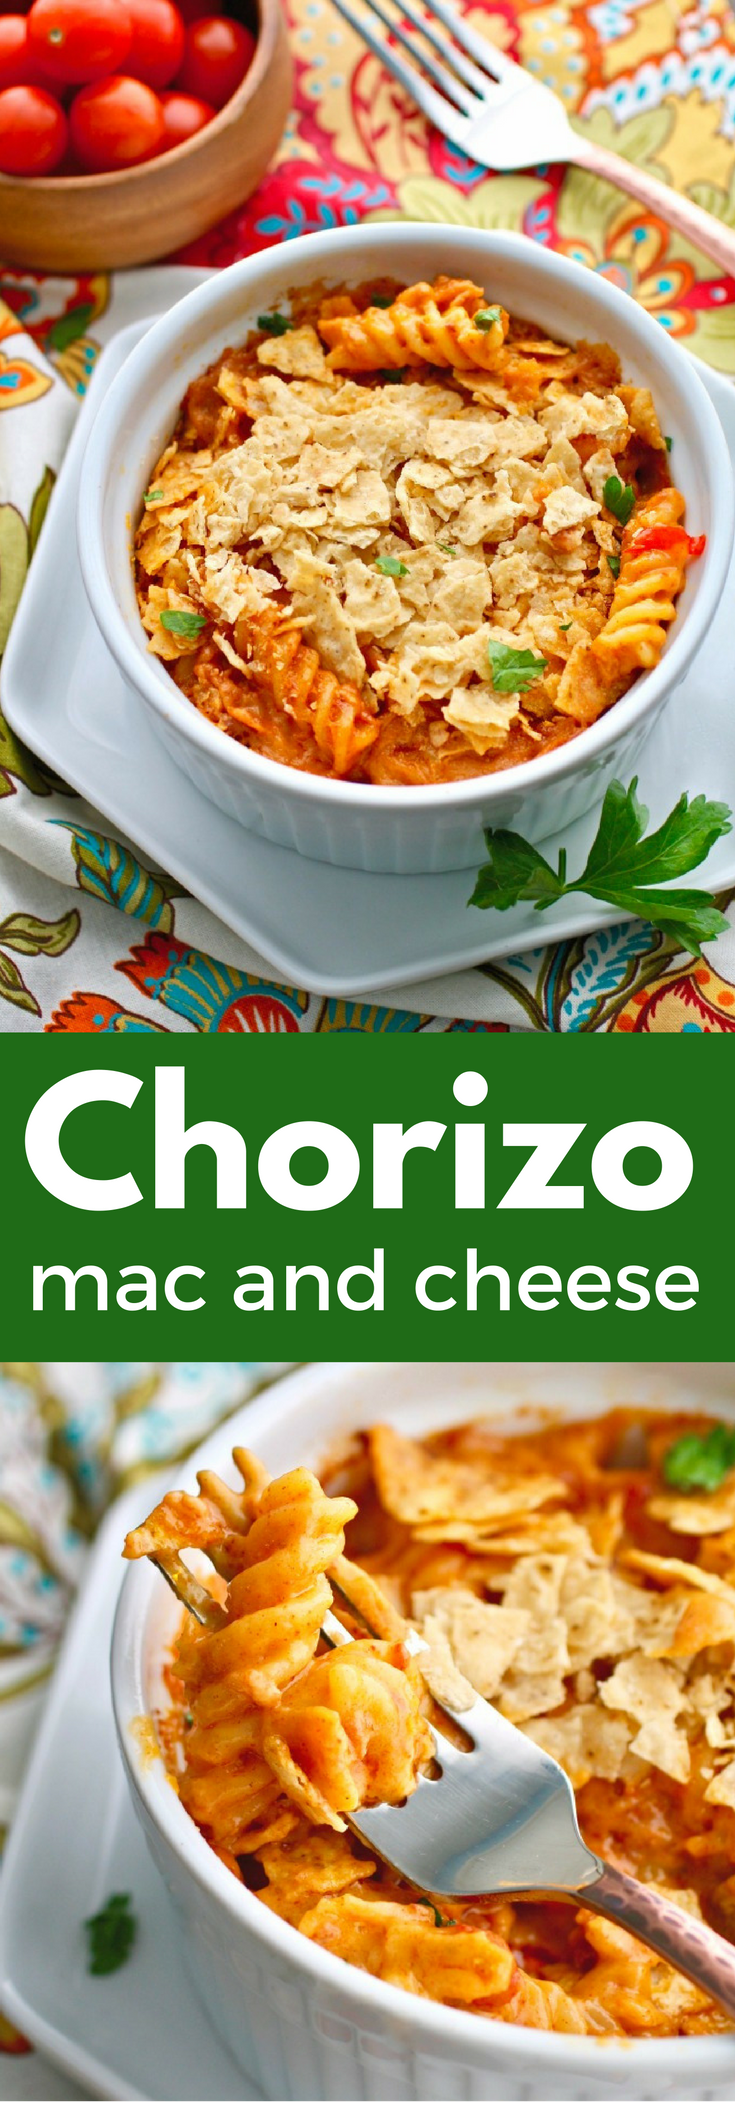 Chorizo Mac and Cheese is just the right amount of zesty to add a nice touch to a classic!